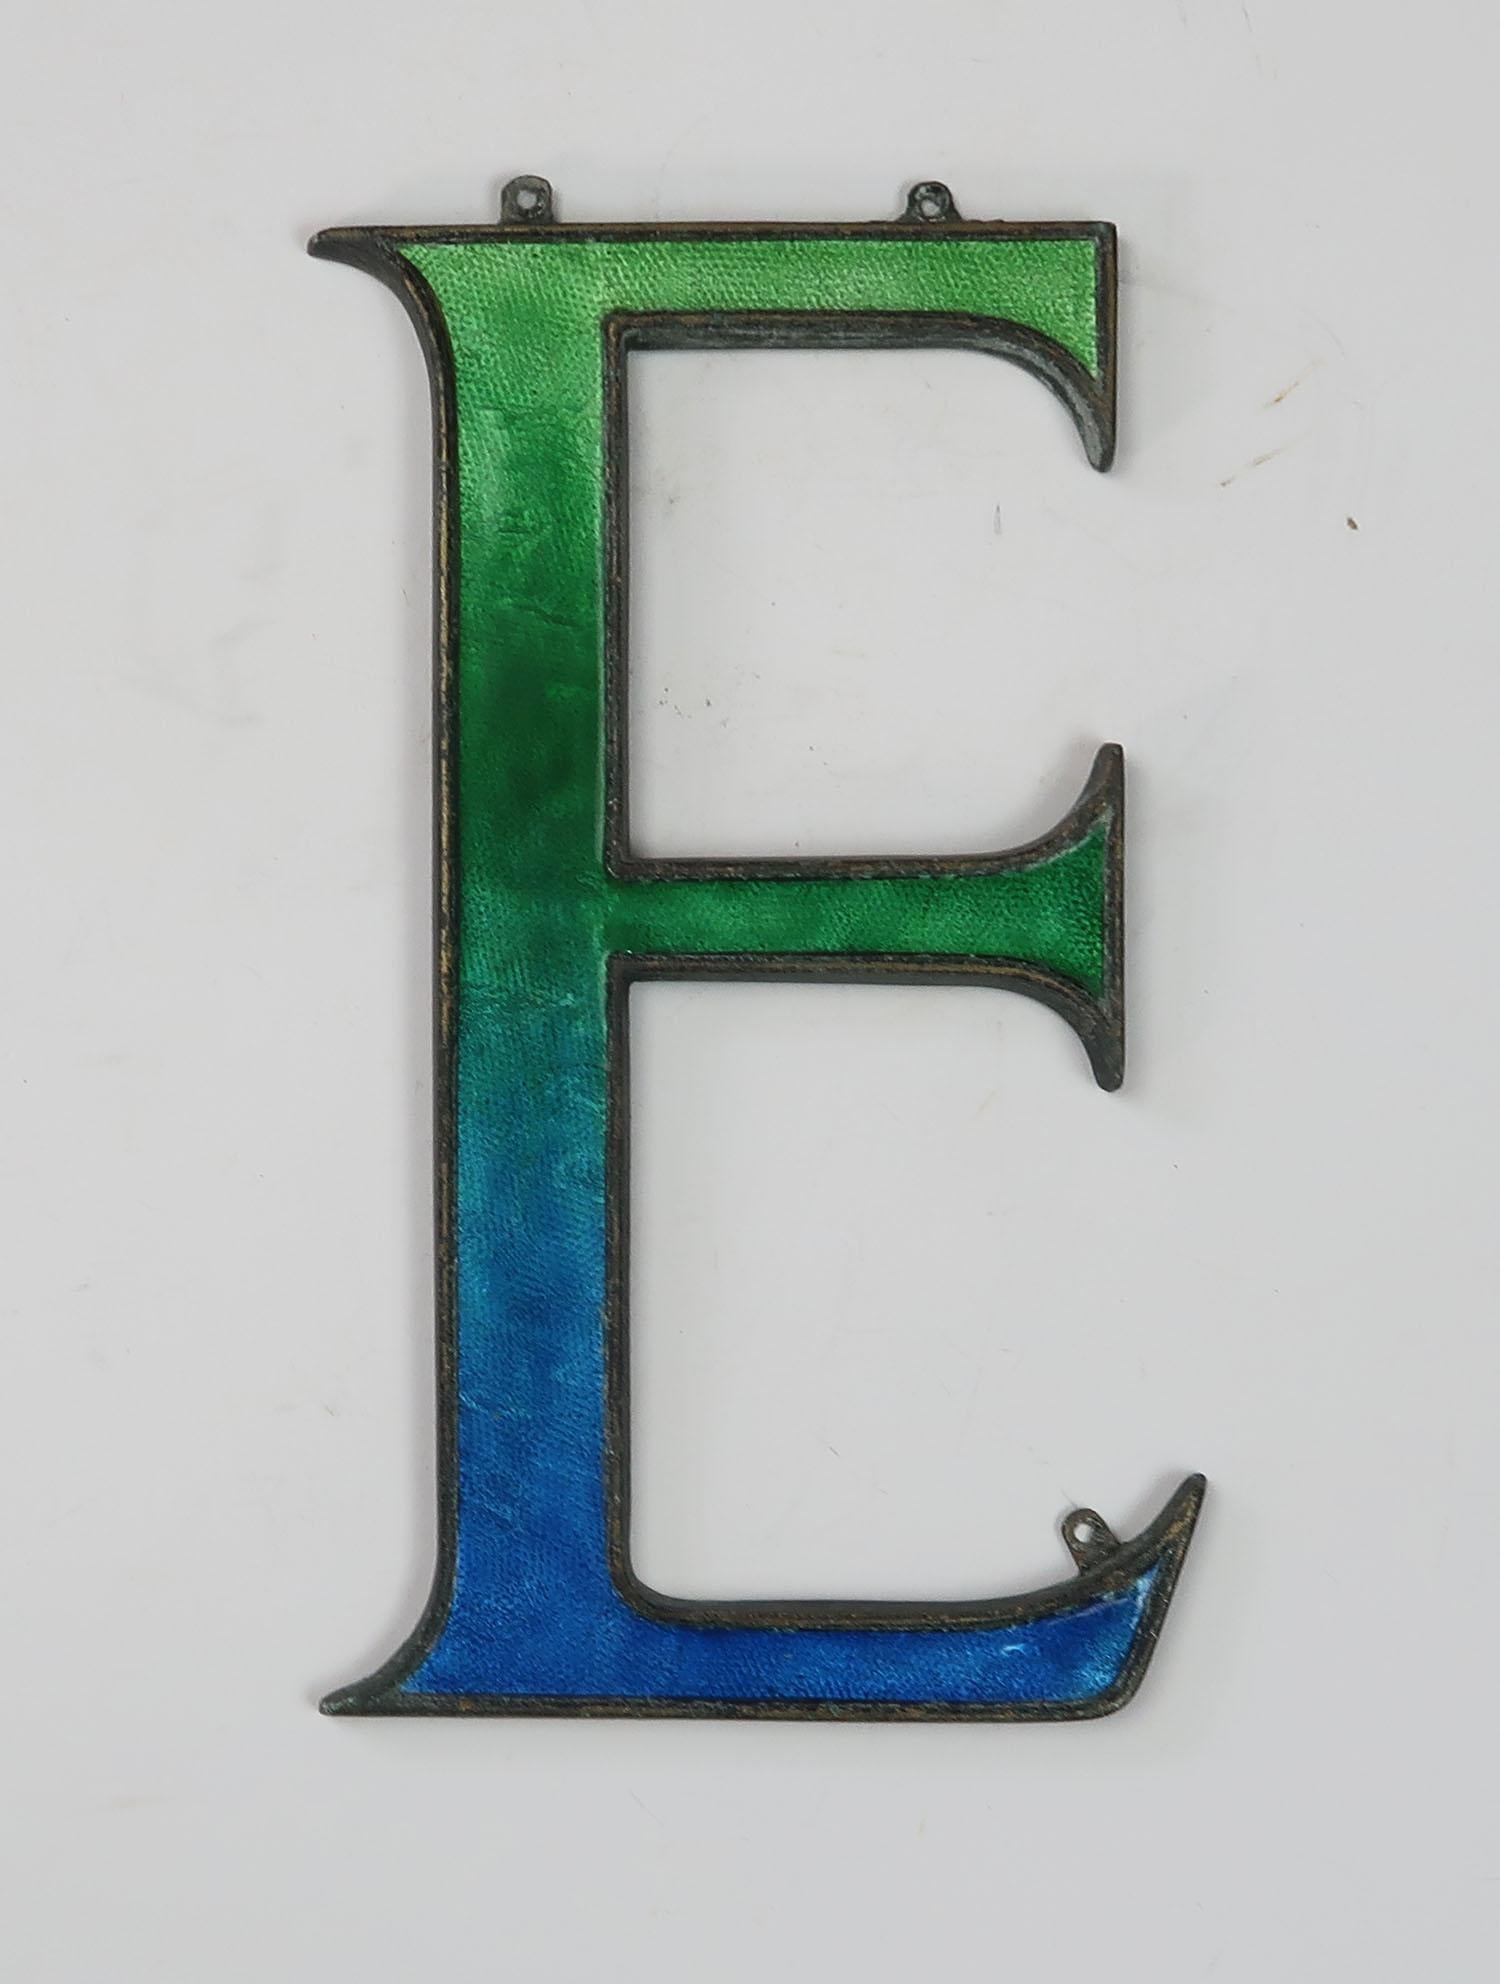 3 wonderful letters in good condition

Enamel on bronze

Beautiful iridescent blues and greens

Probably originally part of a trade sign

Priced individually so you can buy just one, two or the three of them

The measurement below relates